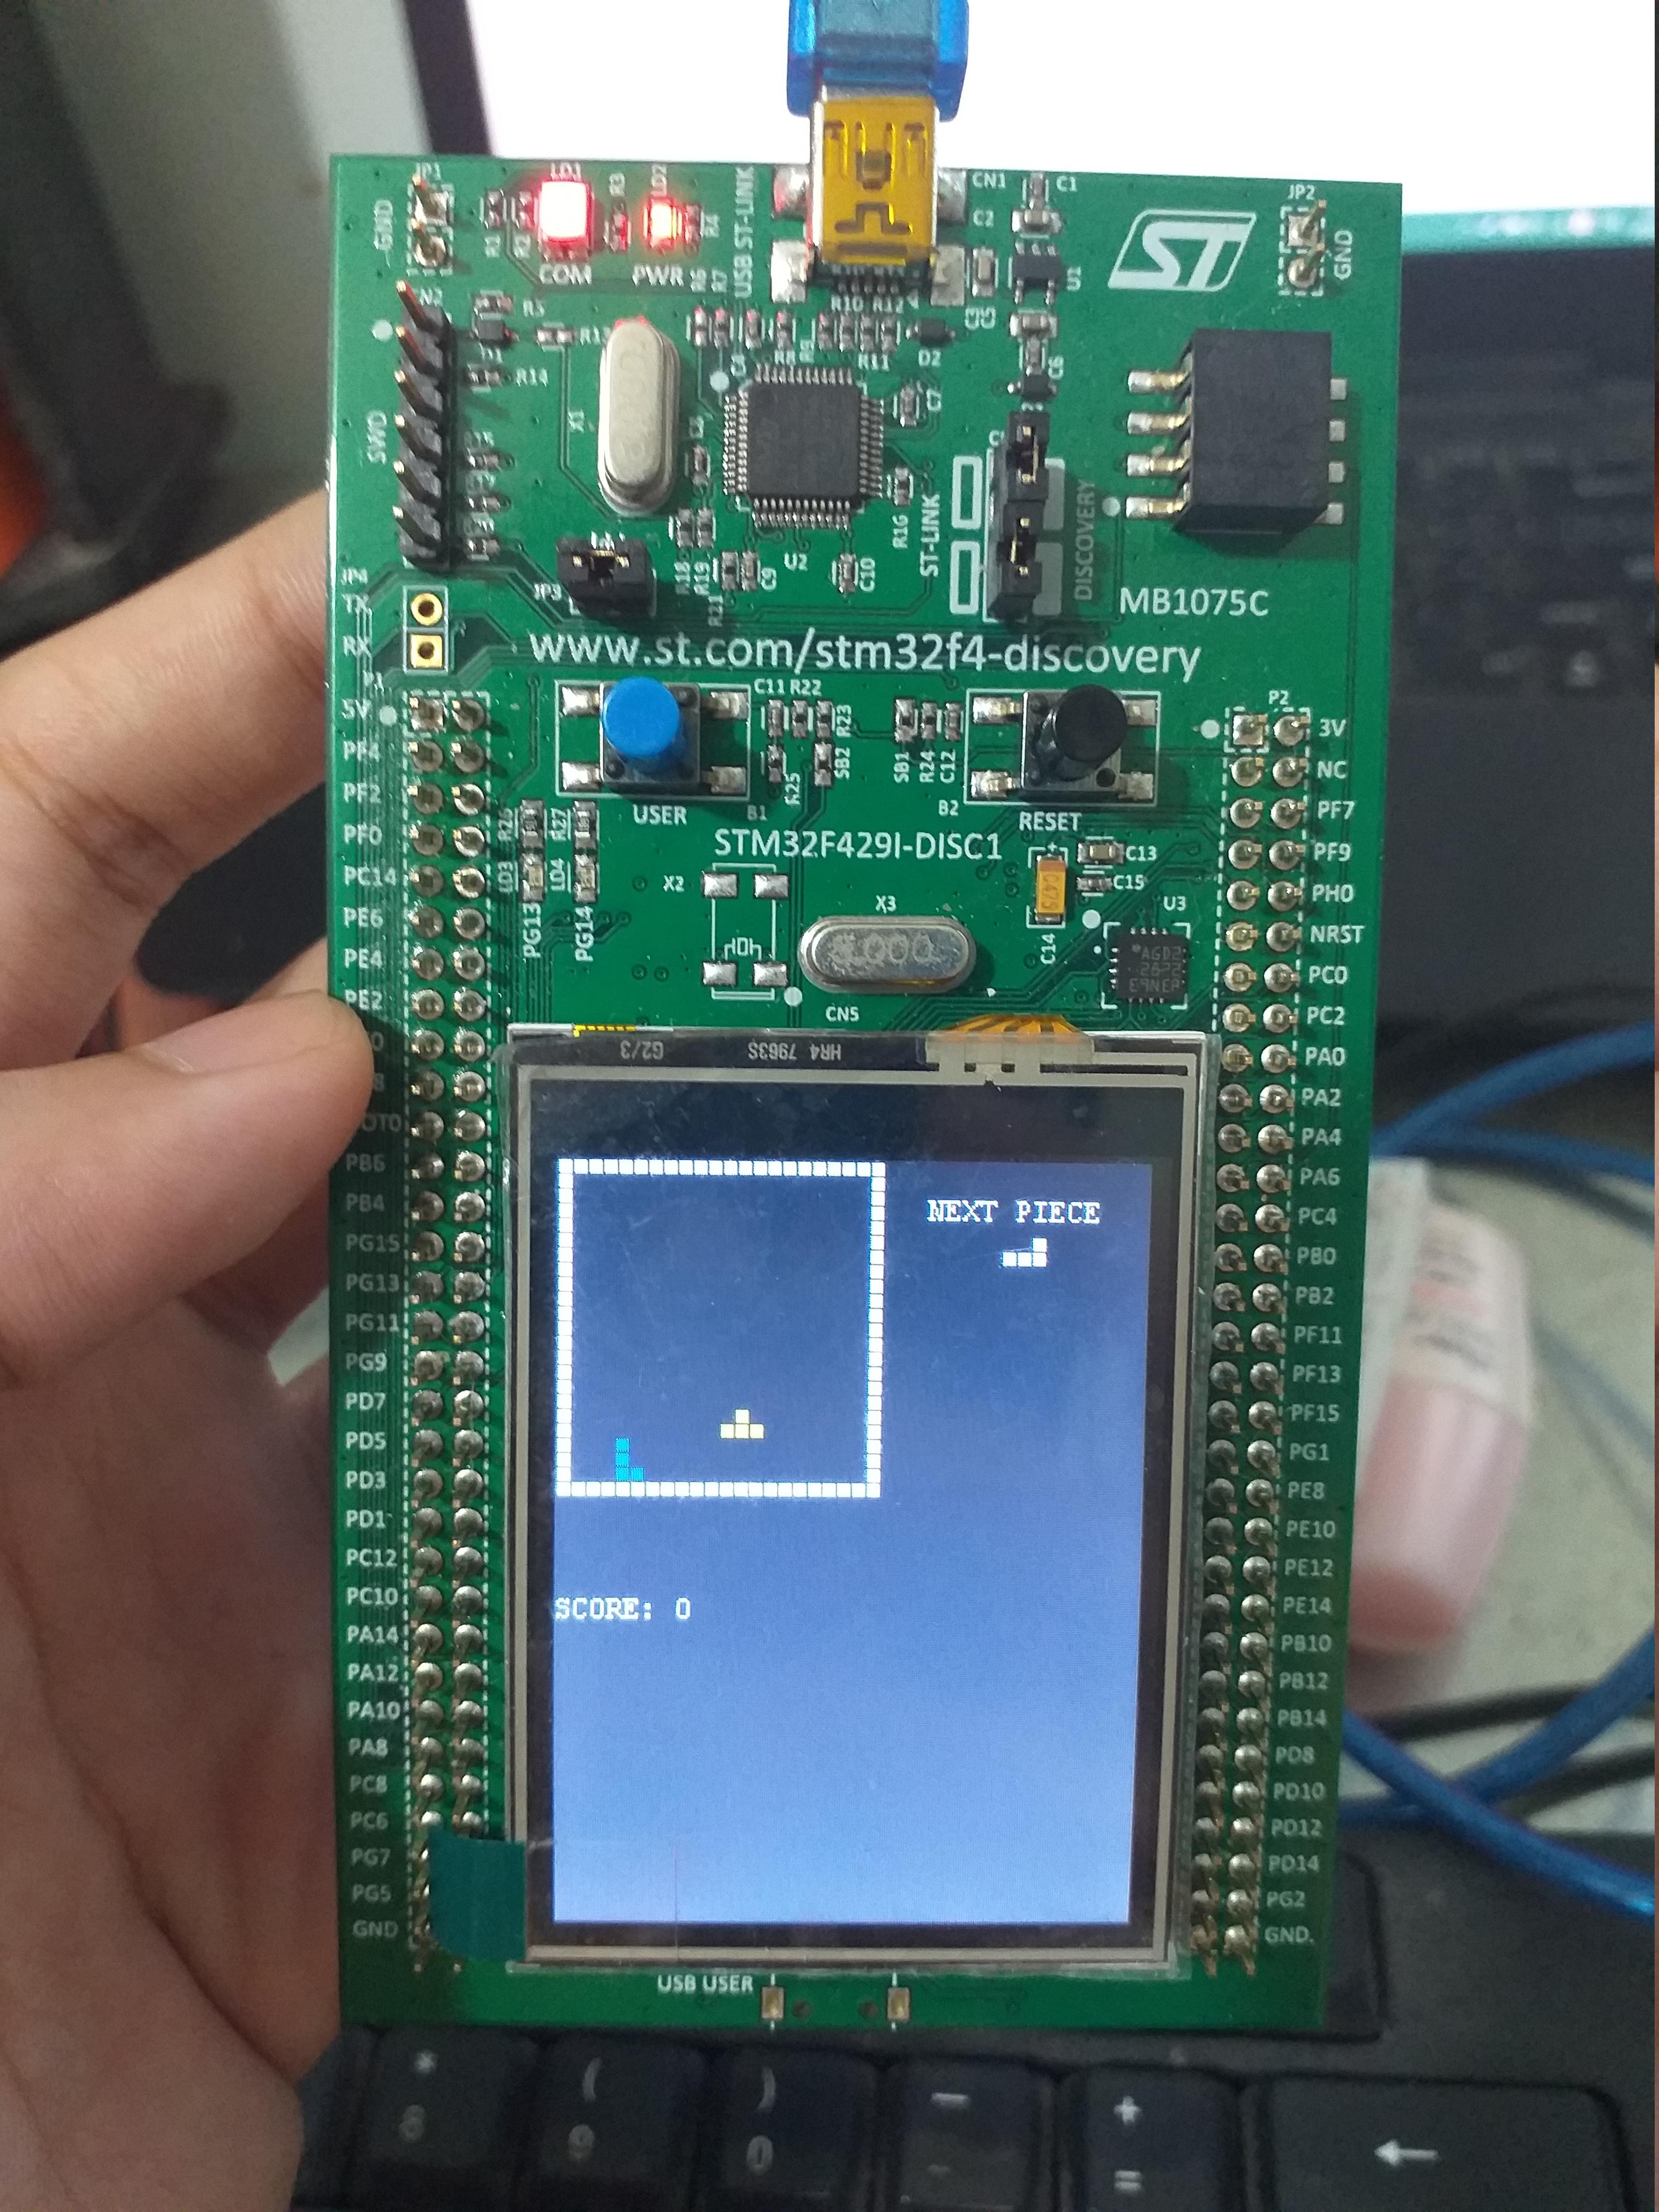 TETRIS on STM32F429 DISCOVERY BOARD